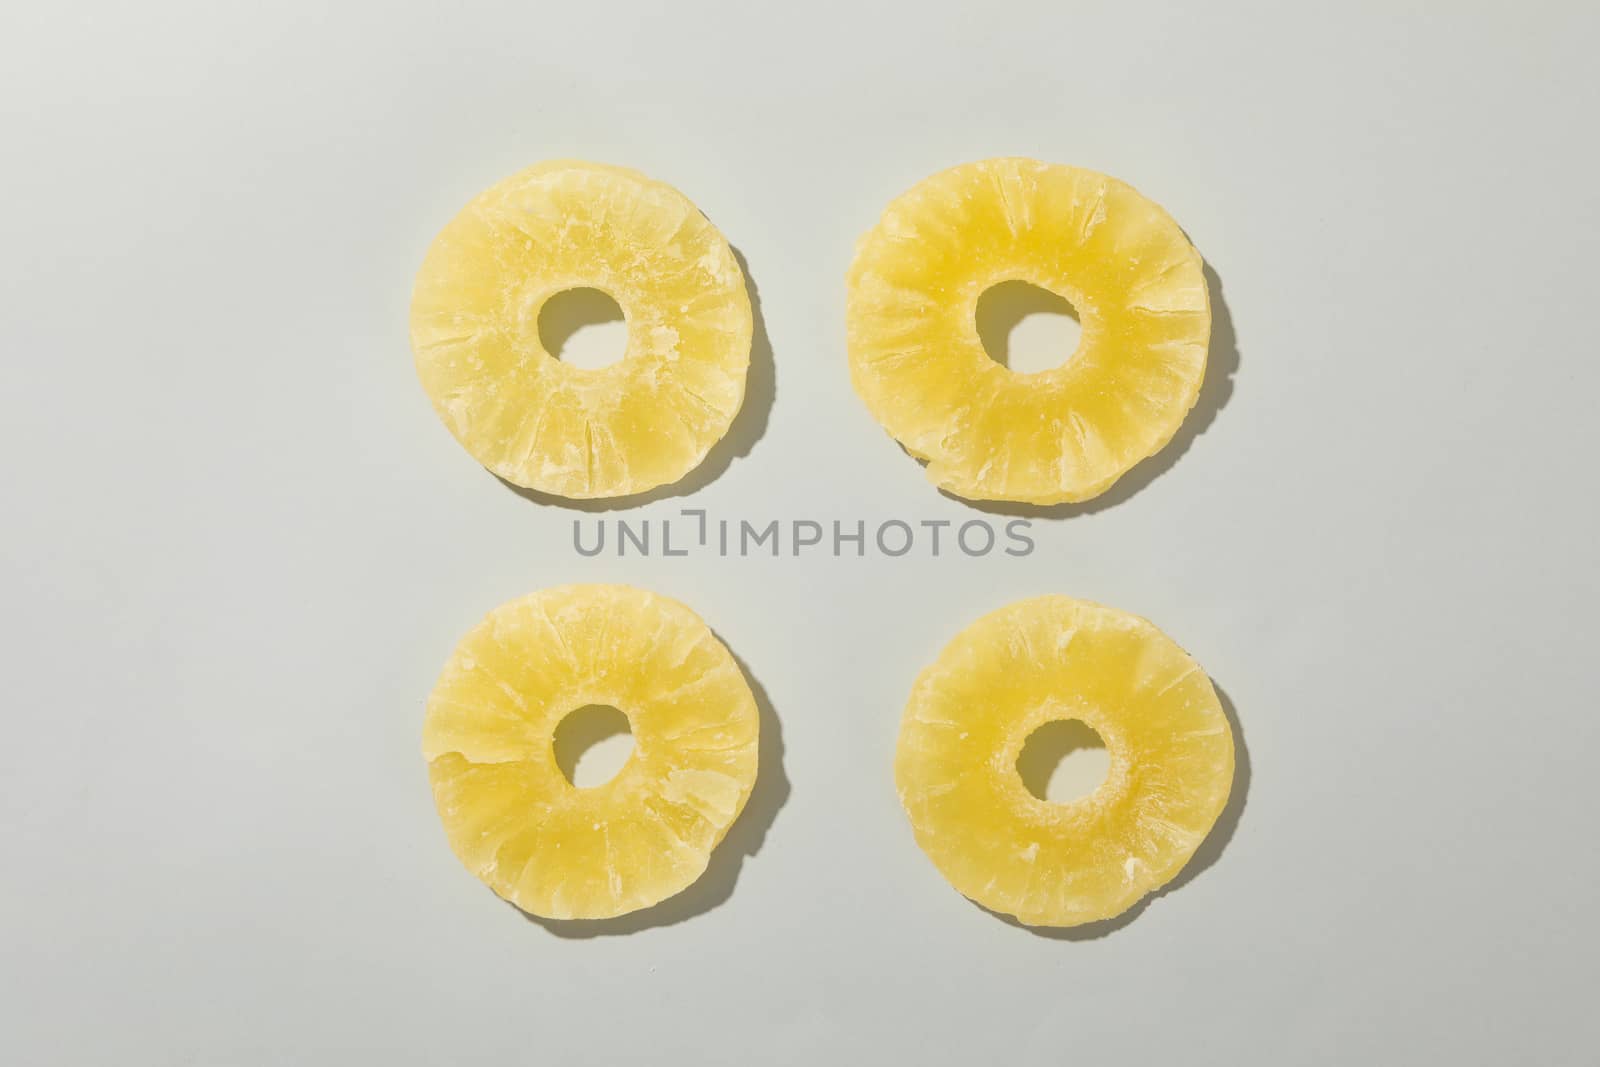 Dried pineapple slices on white background, top view